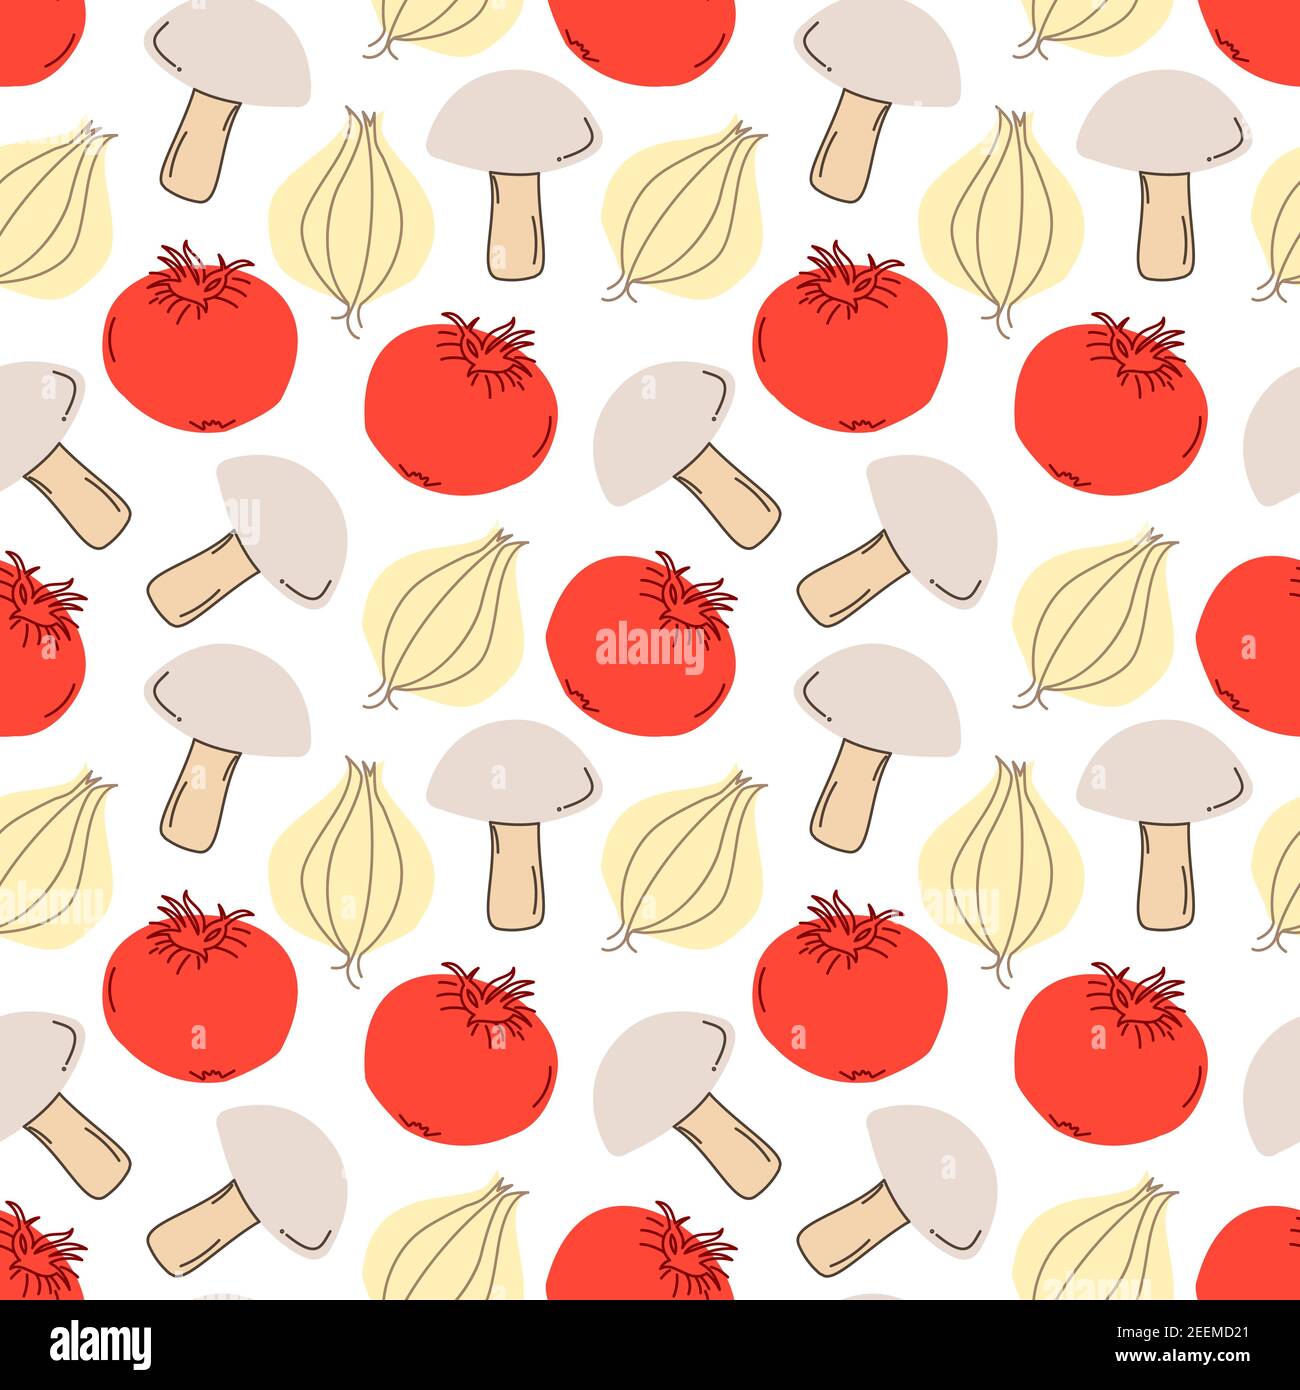 Seamless pattern vegetables with elements of mushrooms, tomatoes, garlic. Vector illustration Stock Vector